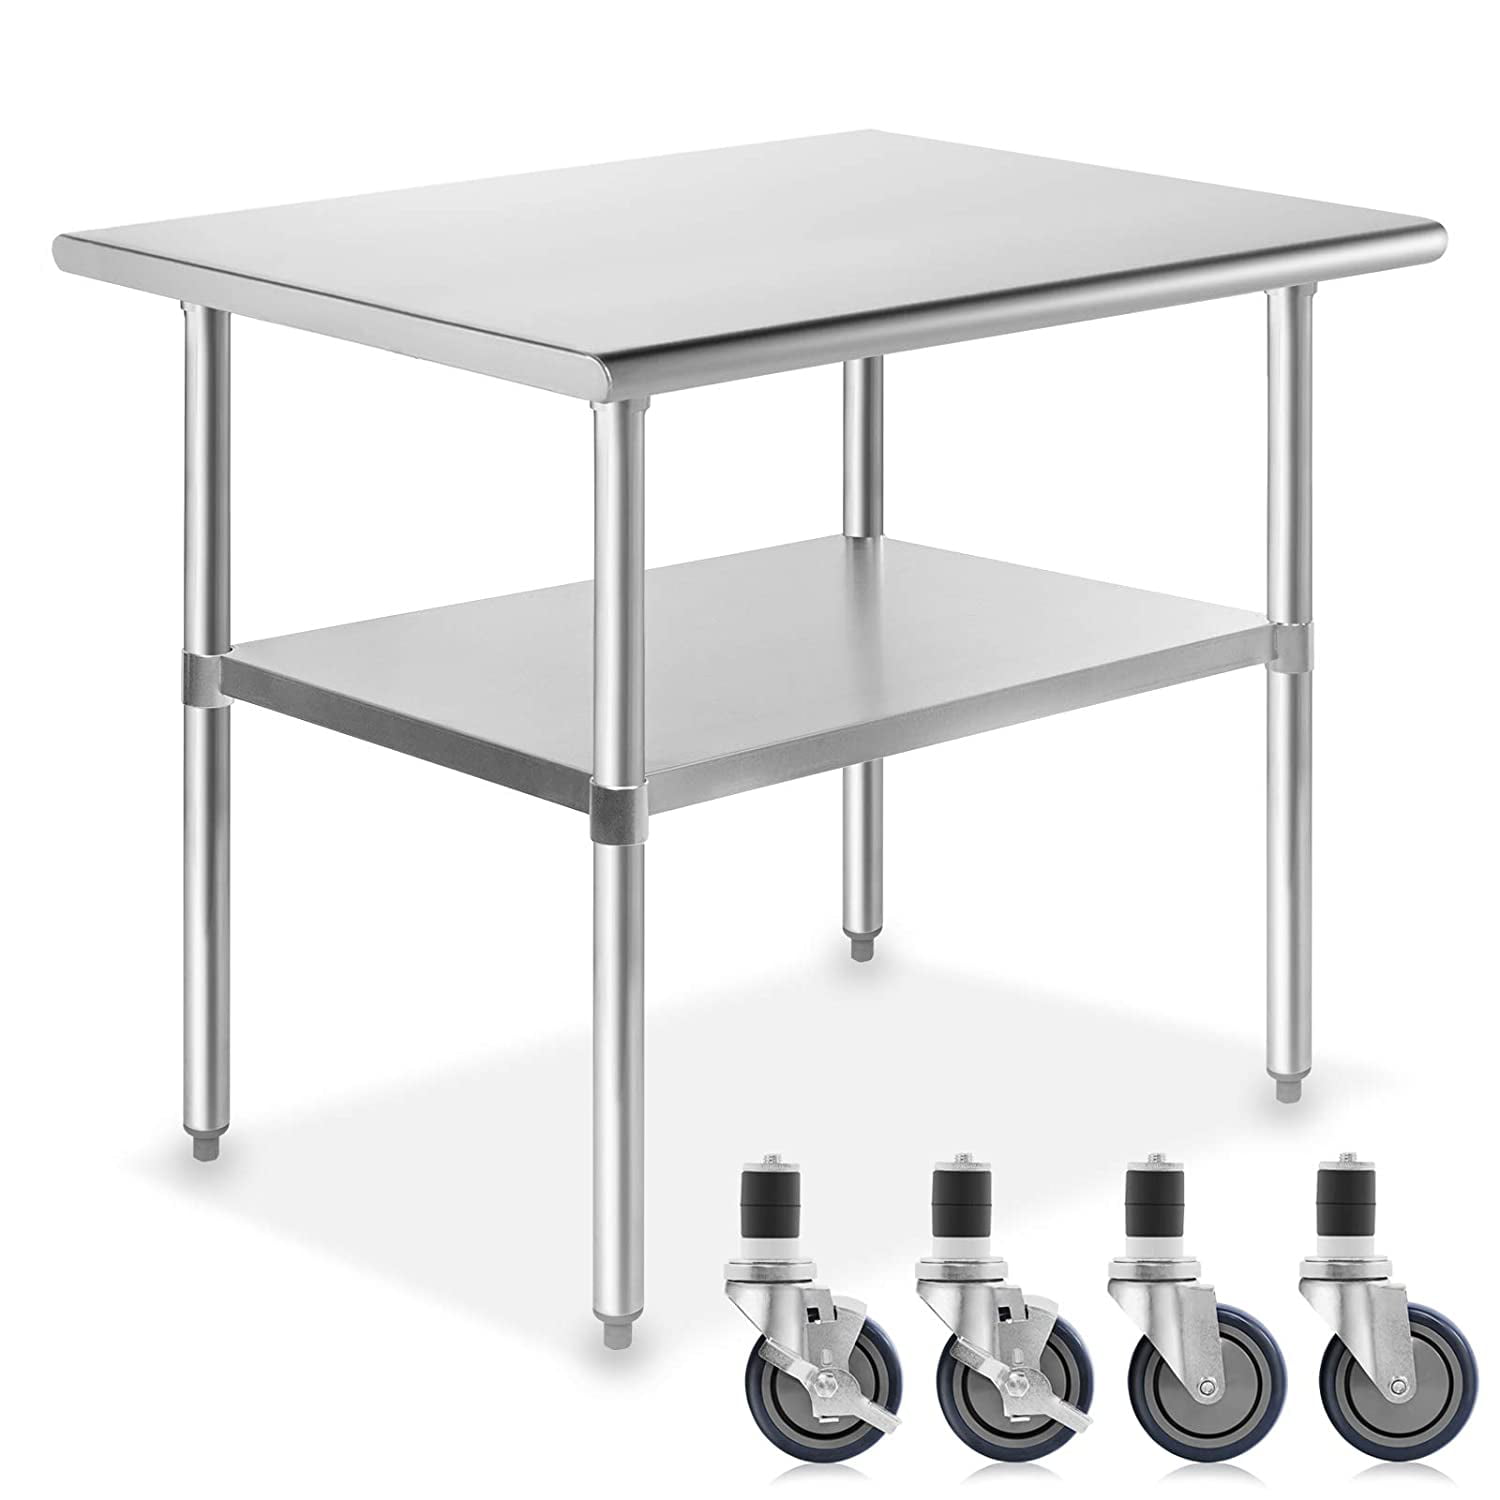 NSF Stainless Steel Commercial Kitchen Prep & Work Table w/ 4 Casters Stainless Steel Table With Wheels